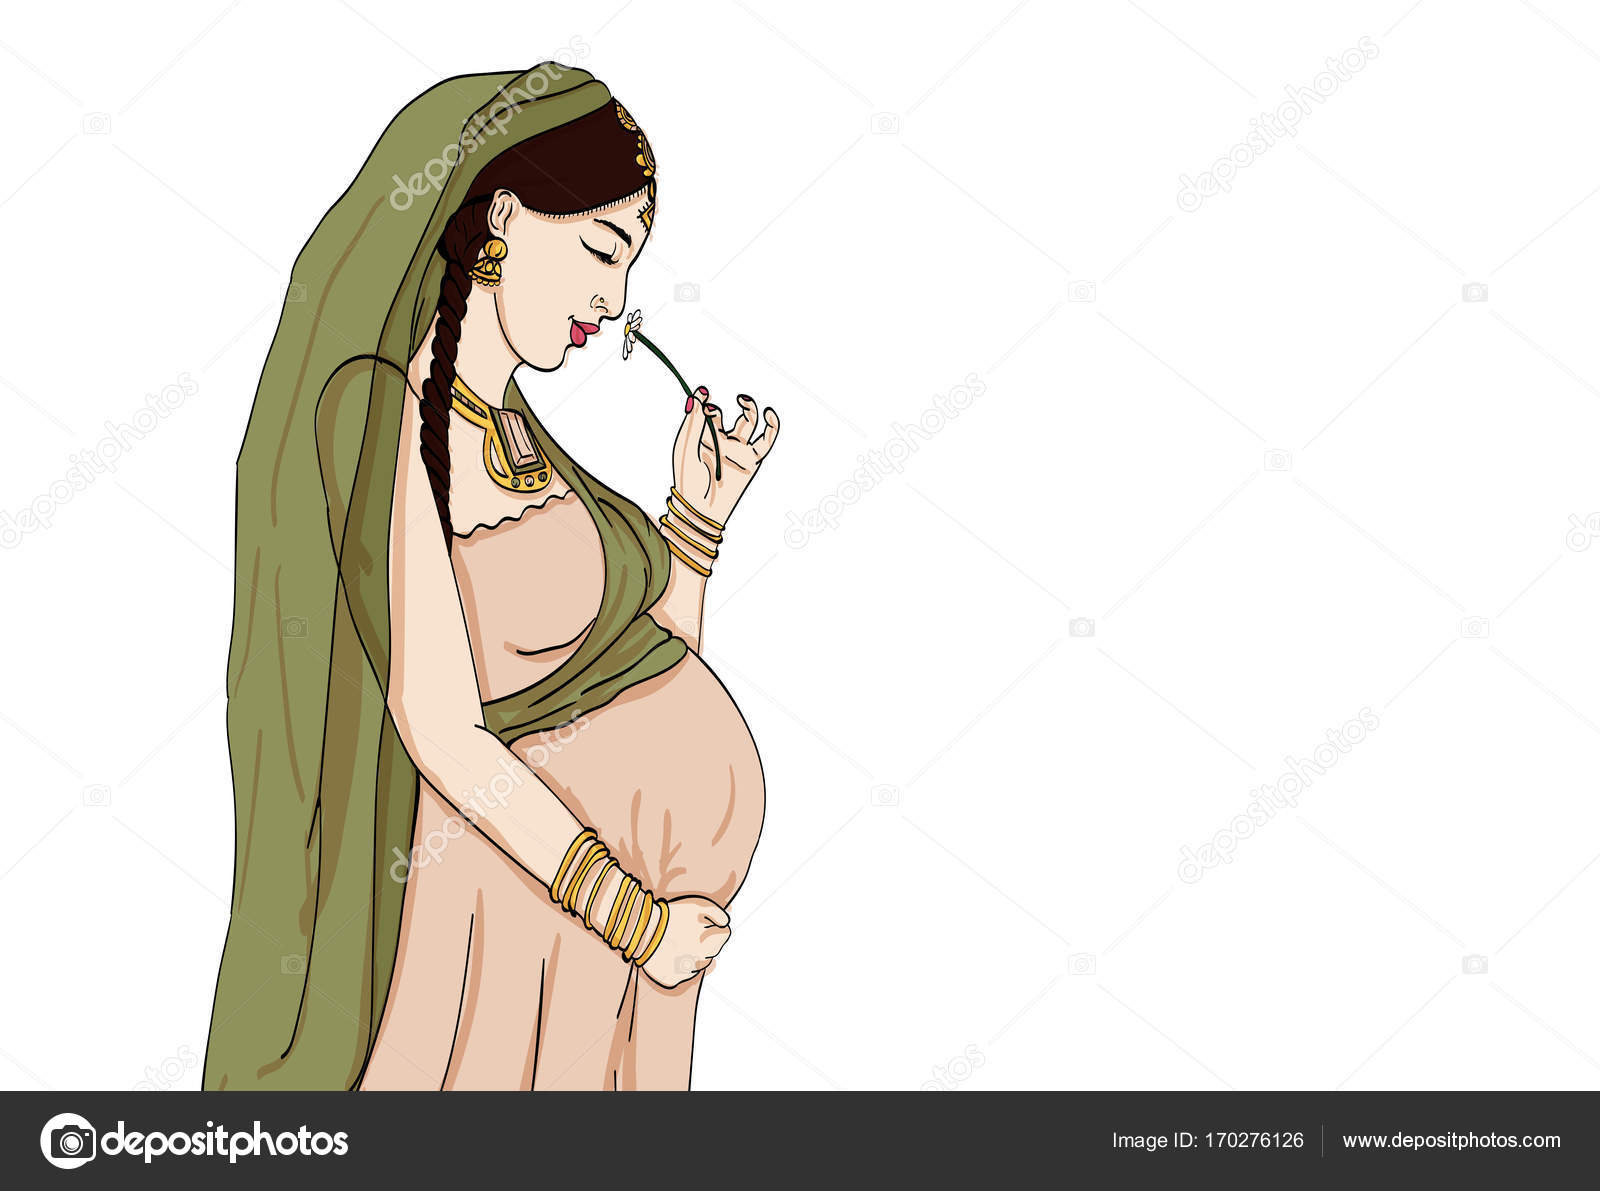 Indian Pregnant Woman Saree Photos and Images & Pictures